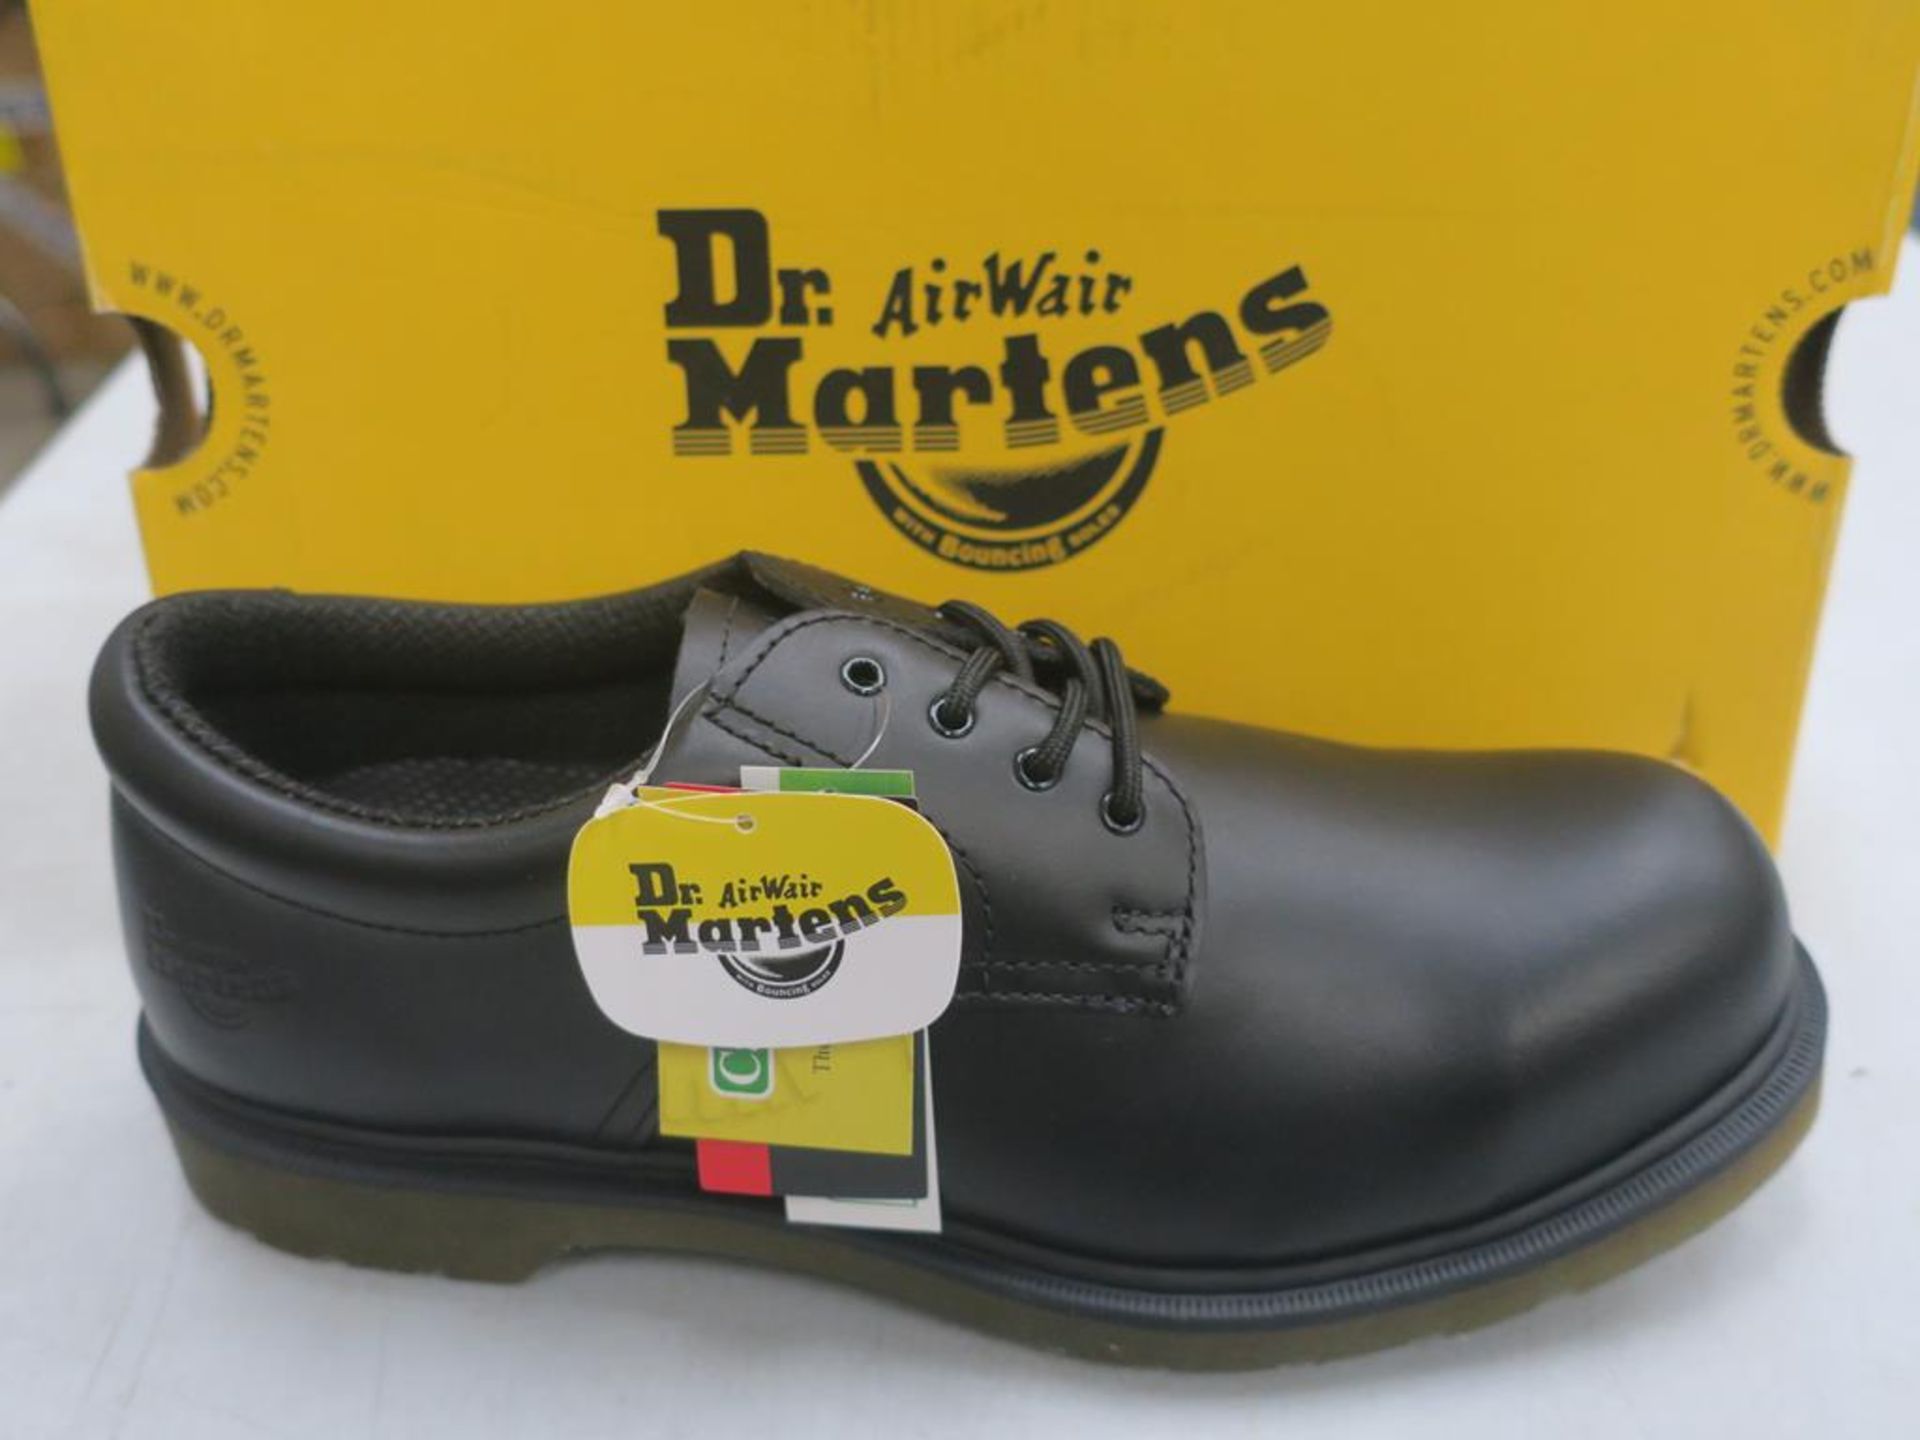 * A pair of New/Boxed Dr Martens shoes, 2216 PW black fne haircell, (13711001) UK size 10